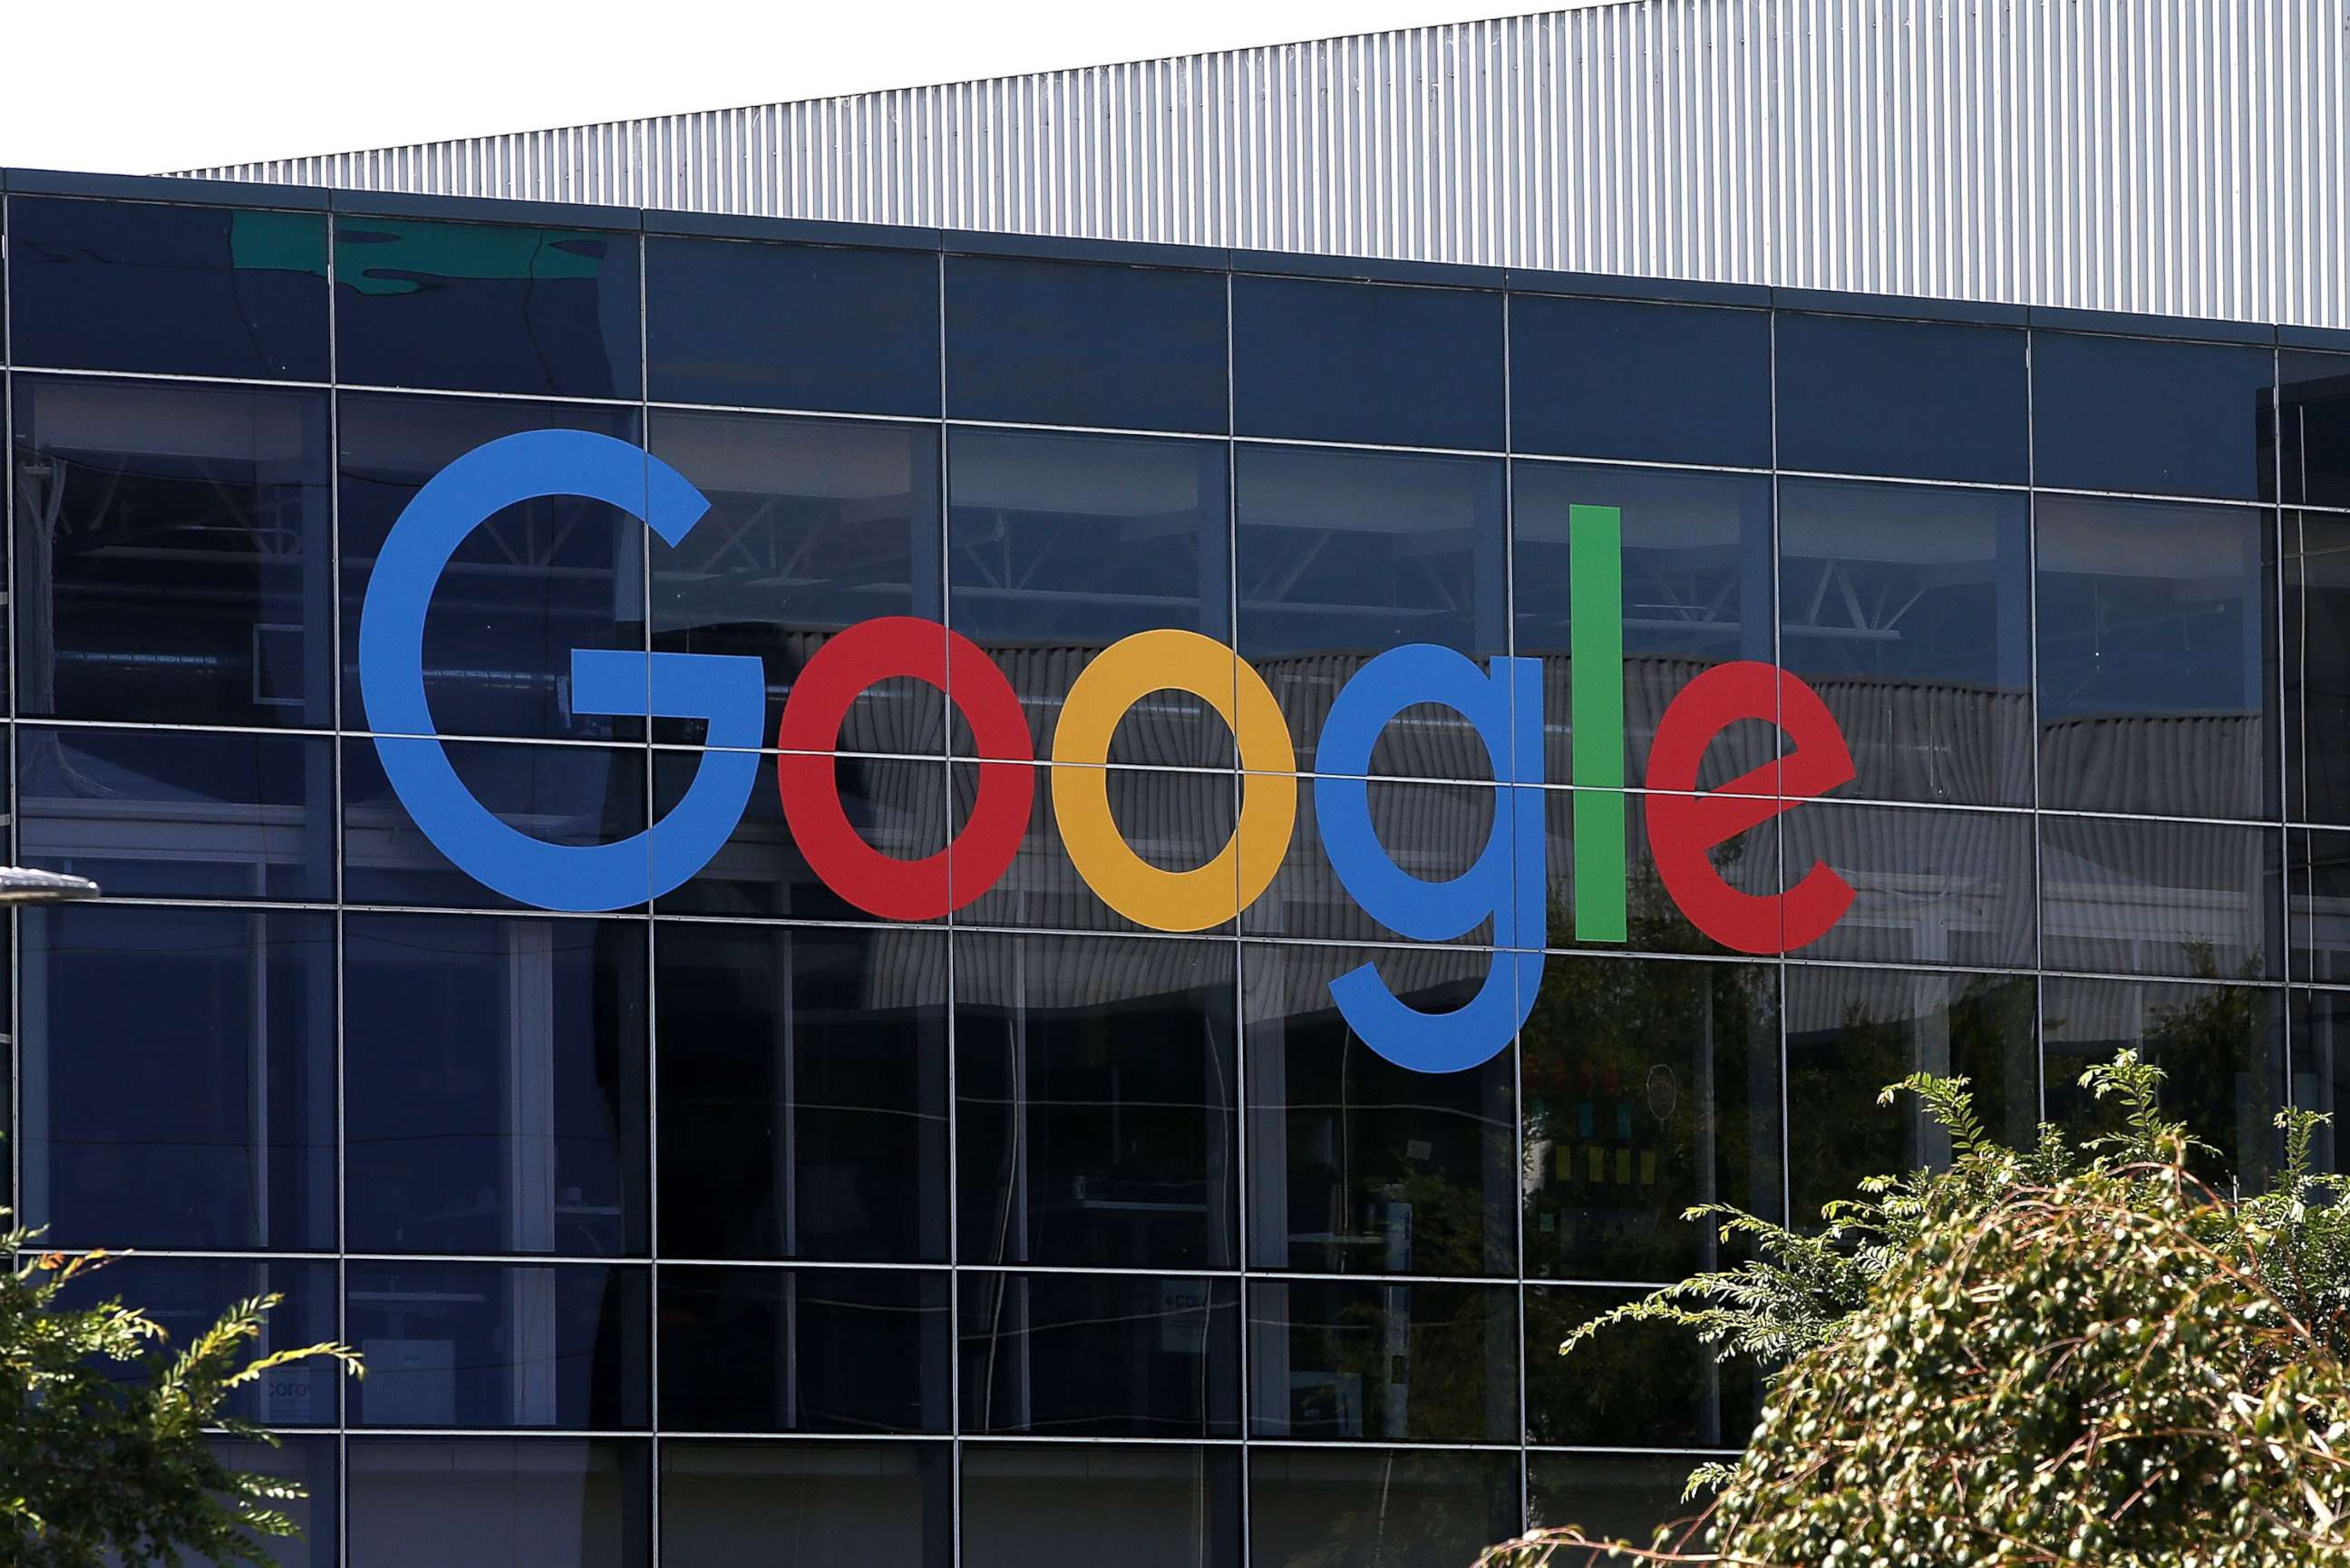 PHOTO: The new Google logo is displayed at the Google headquarters, Sept. 2, 2015 in Mountain View, Calif.  